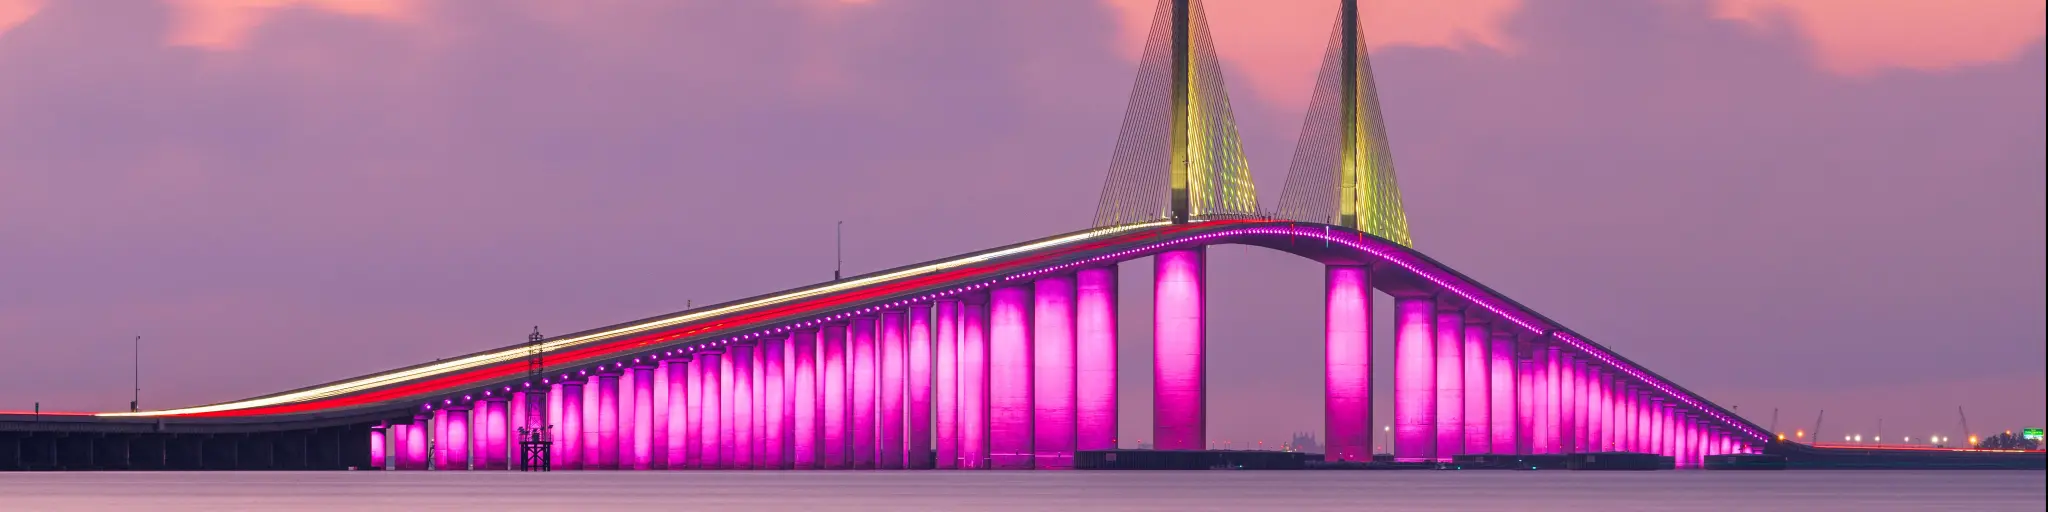 Sunshine Skyway Bridge, St. Petersburg spanning the Lower Tampa Bay at sunset and lit up in a bright pink.